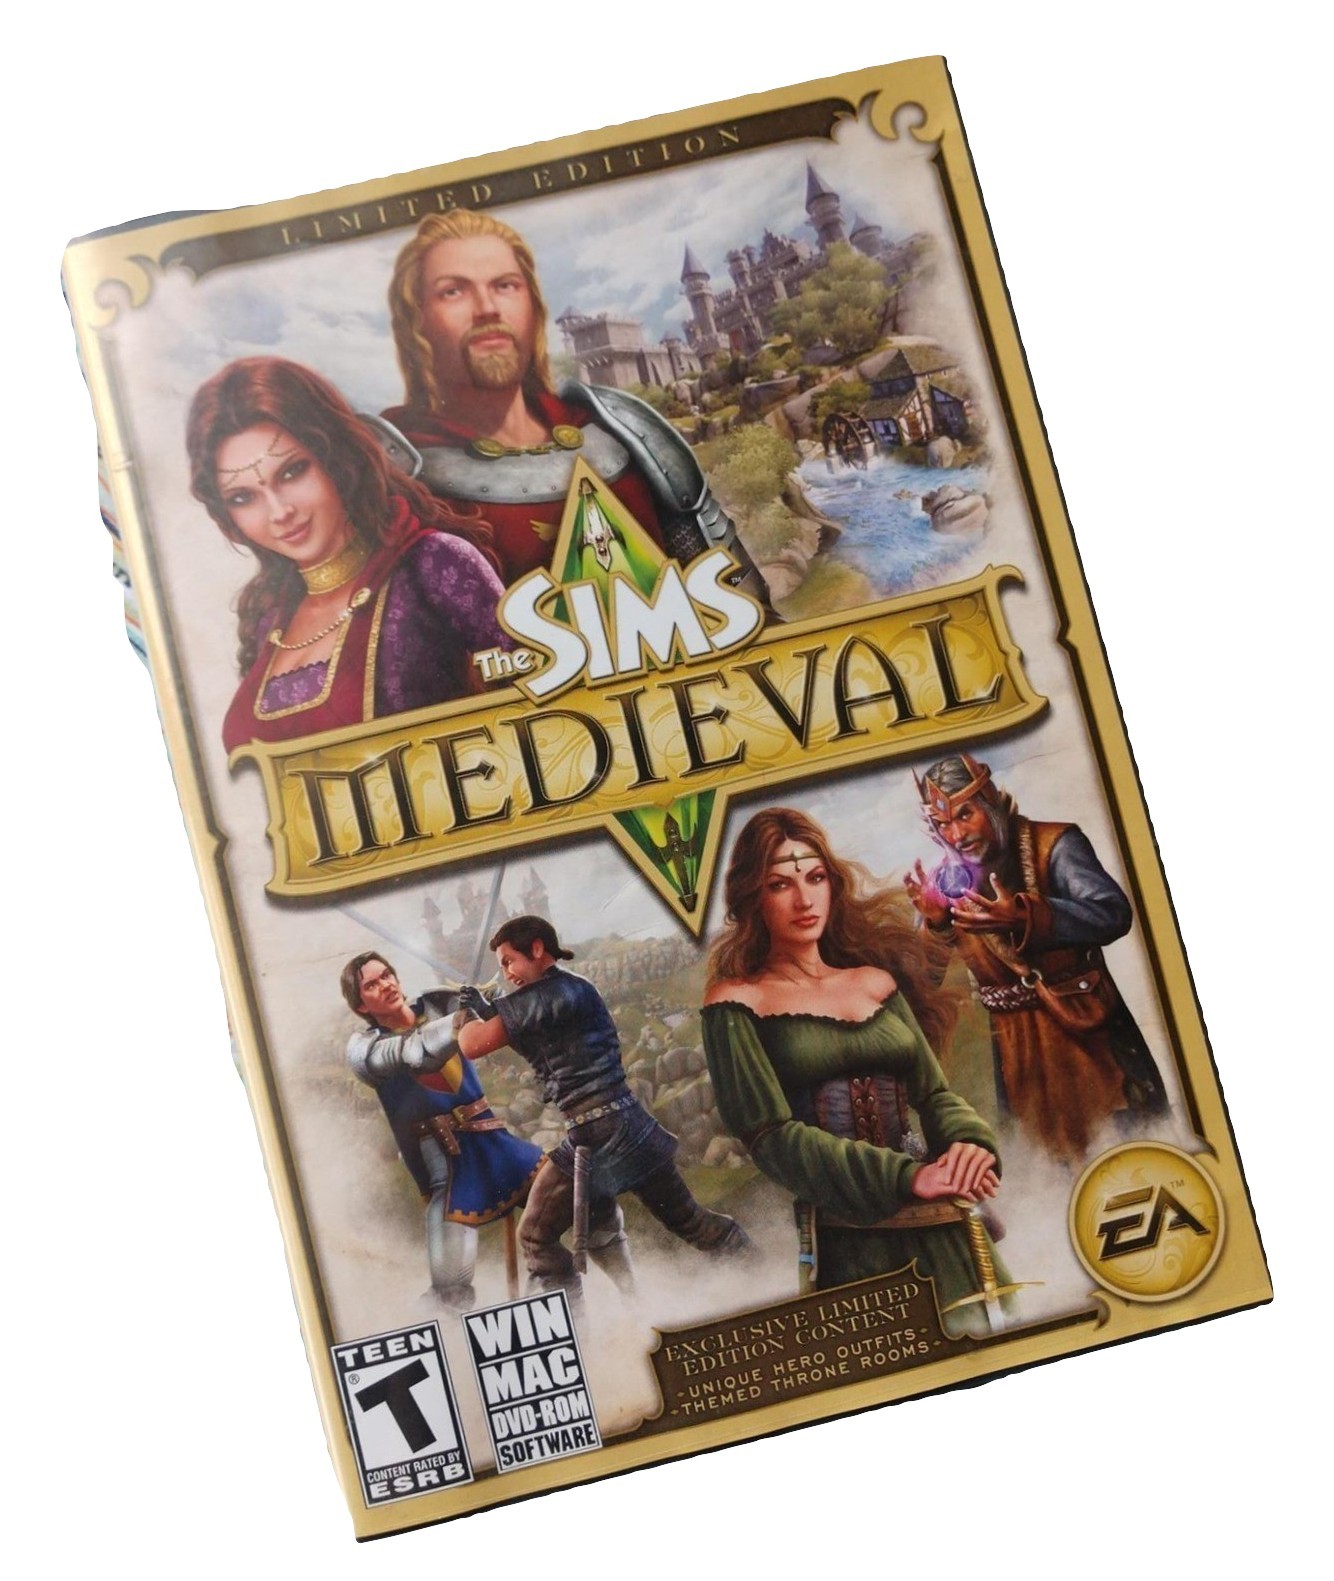 the sims medieval deluxe edition free torrent